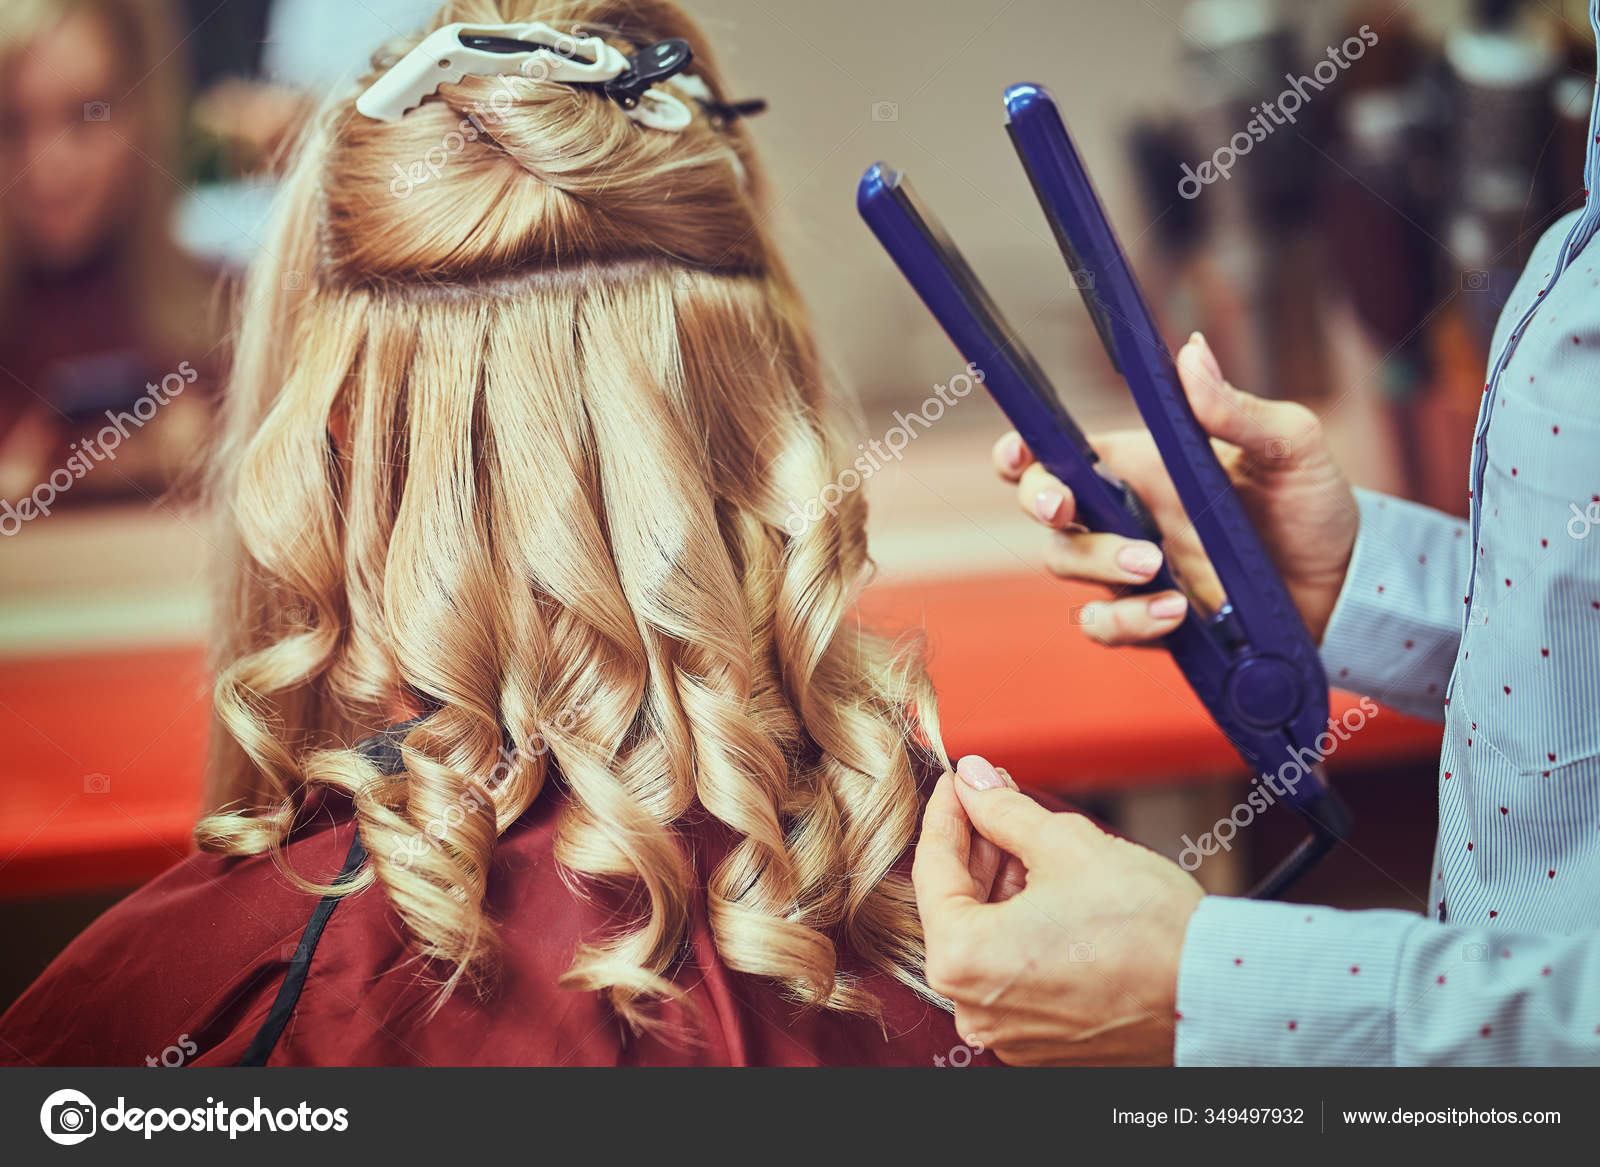 Curling tongs Stock Photos, Royalty Free Curling tongs Images |  Depositphotos